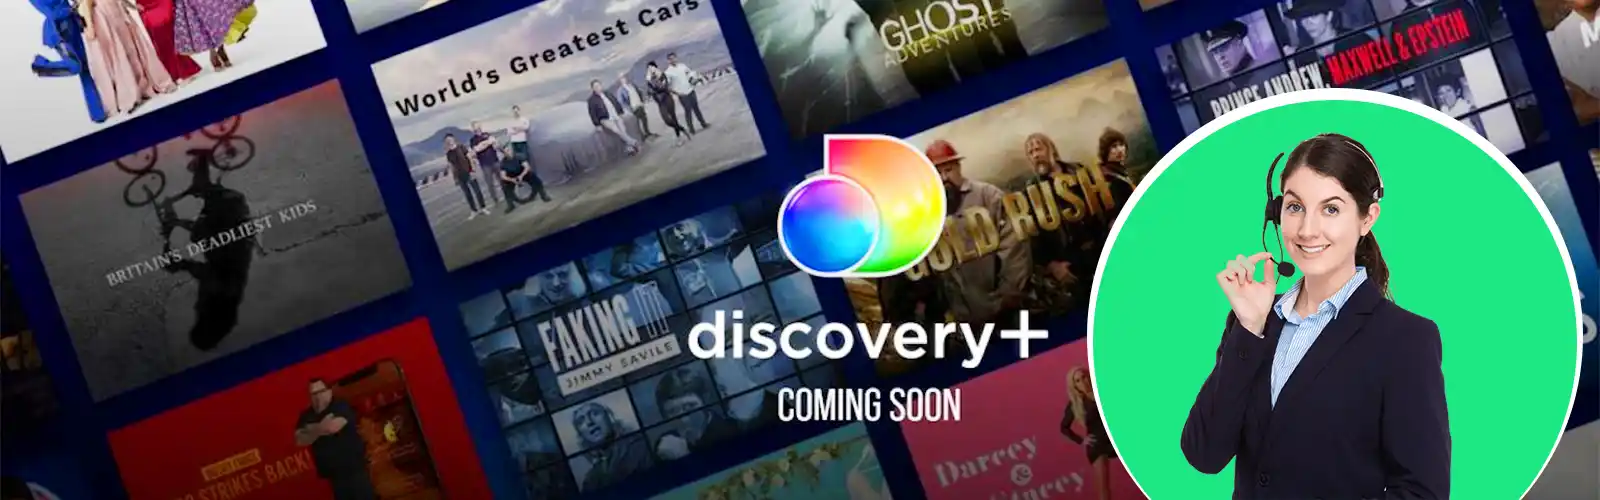 Discovery-Plus-Customer-Service